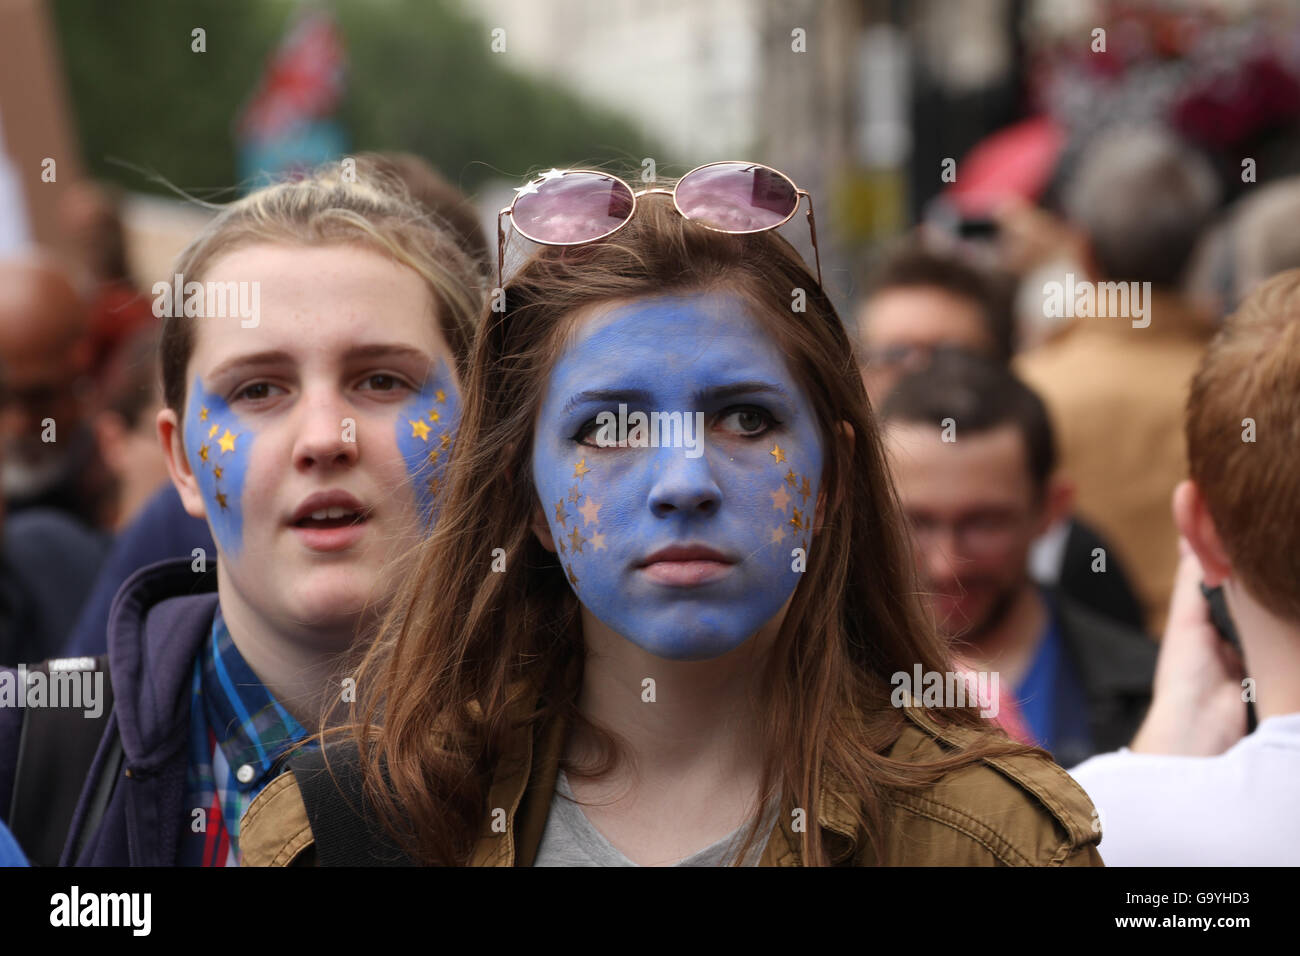 London, UK. 02nd July, 2016. LONDON, UK - JULY 2: Two face painted friends march along with the thousands of other pro EU supporters in London take part in the March For Europe demonstration a week after the Brexit Referendum vote. The pr Eu supporters march from Hyde Park to parliament Square.Photo: David Mbiyu/ Alamy New Live Stock Photo